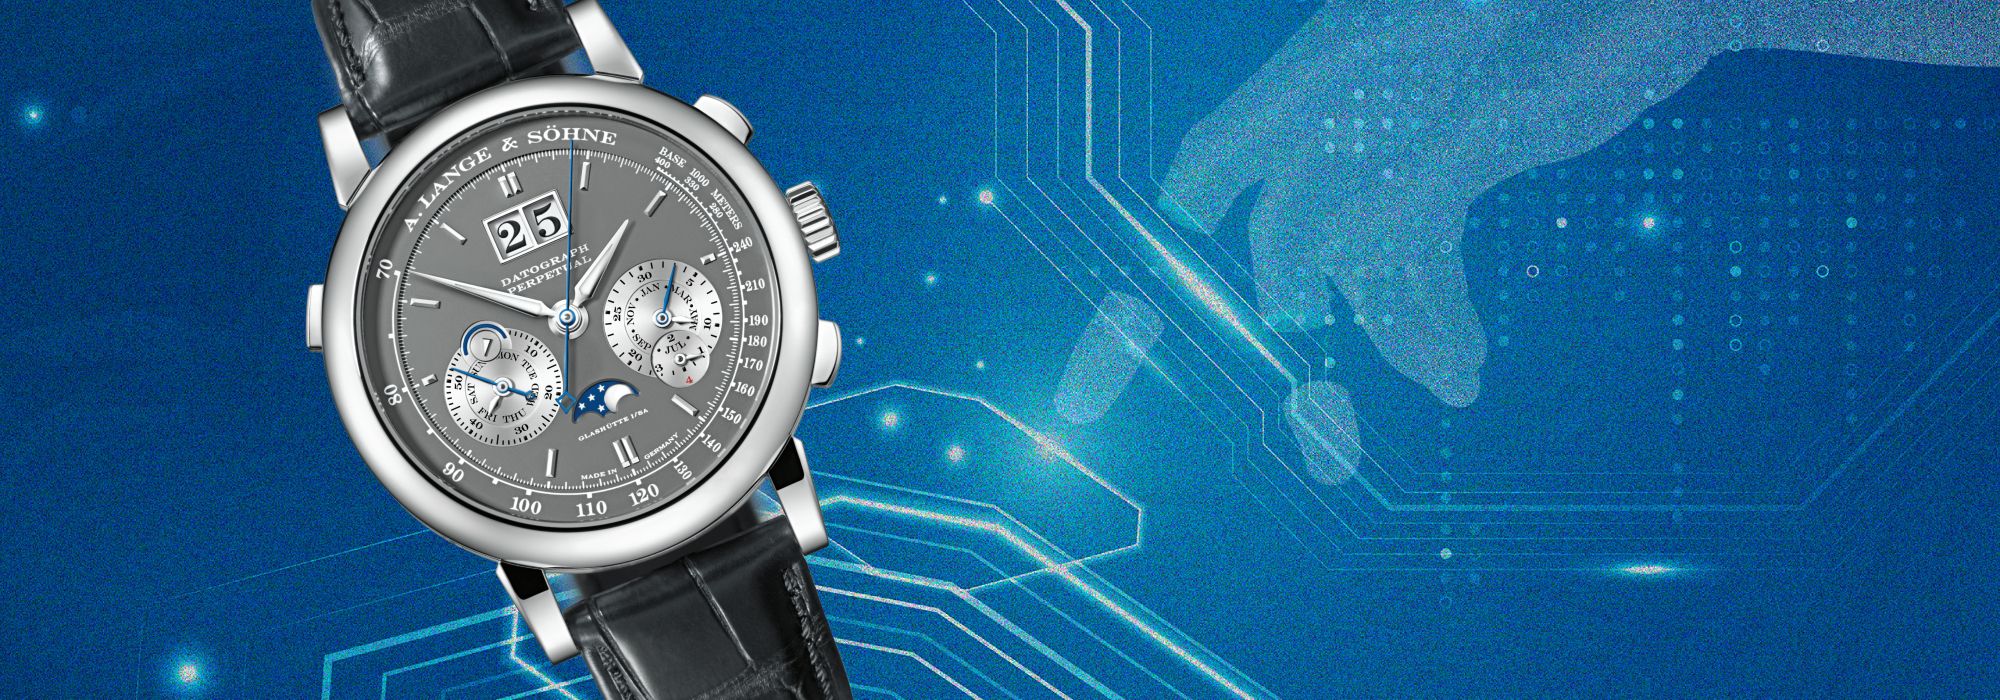 Algorithms At Work: Opening A Portal To The Future Of Watch World With Artificial Intelligence